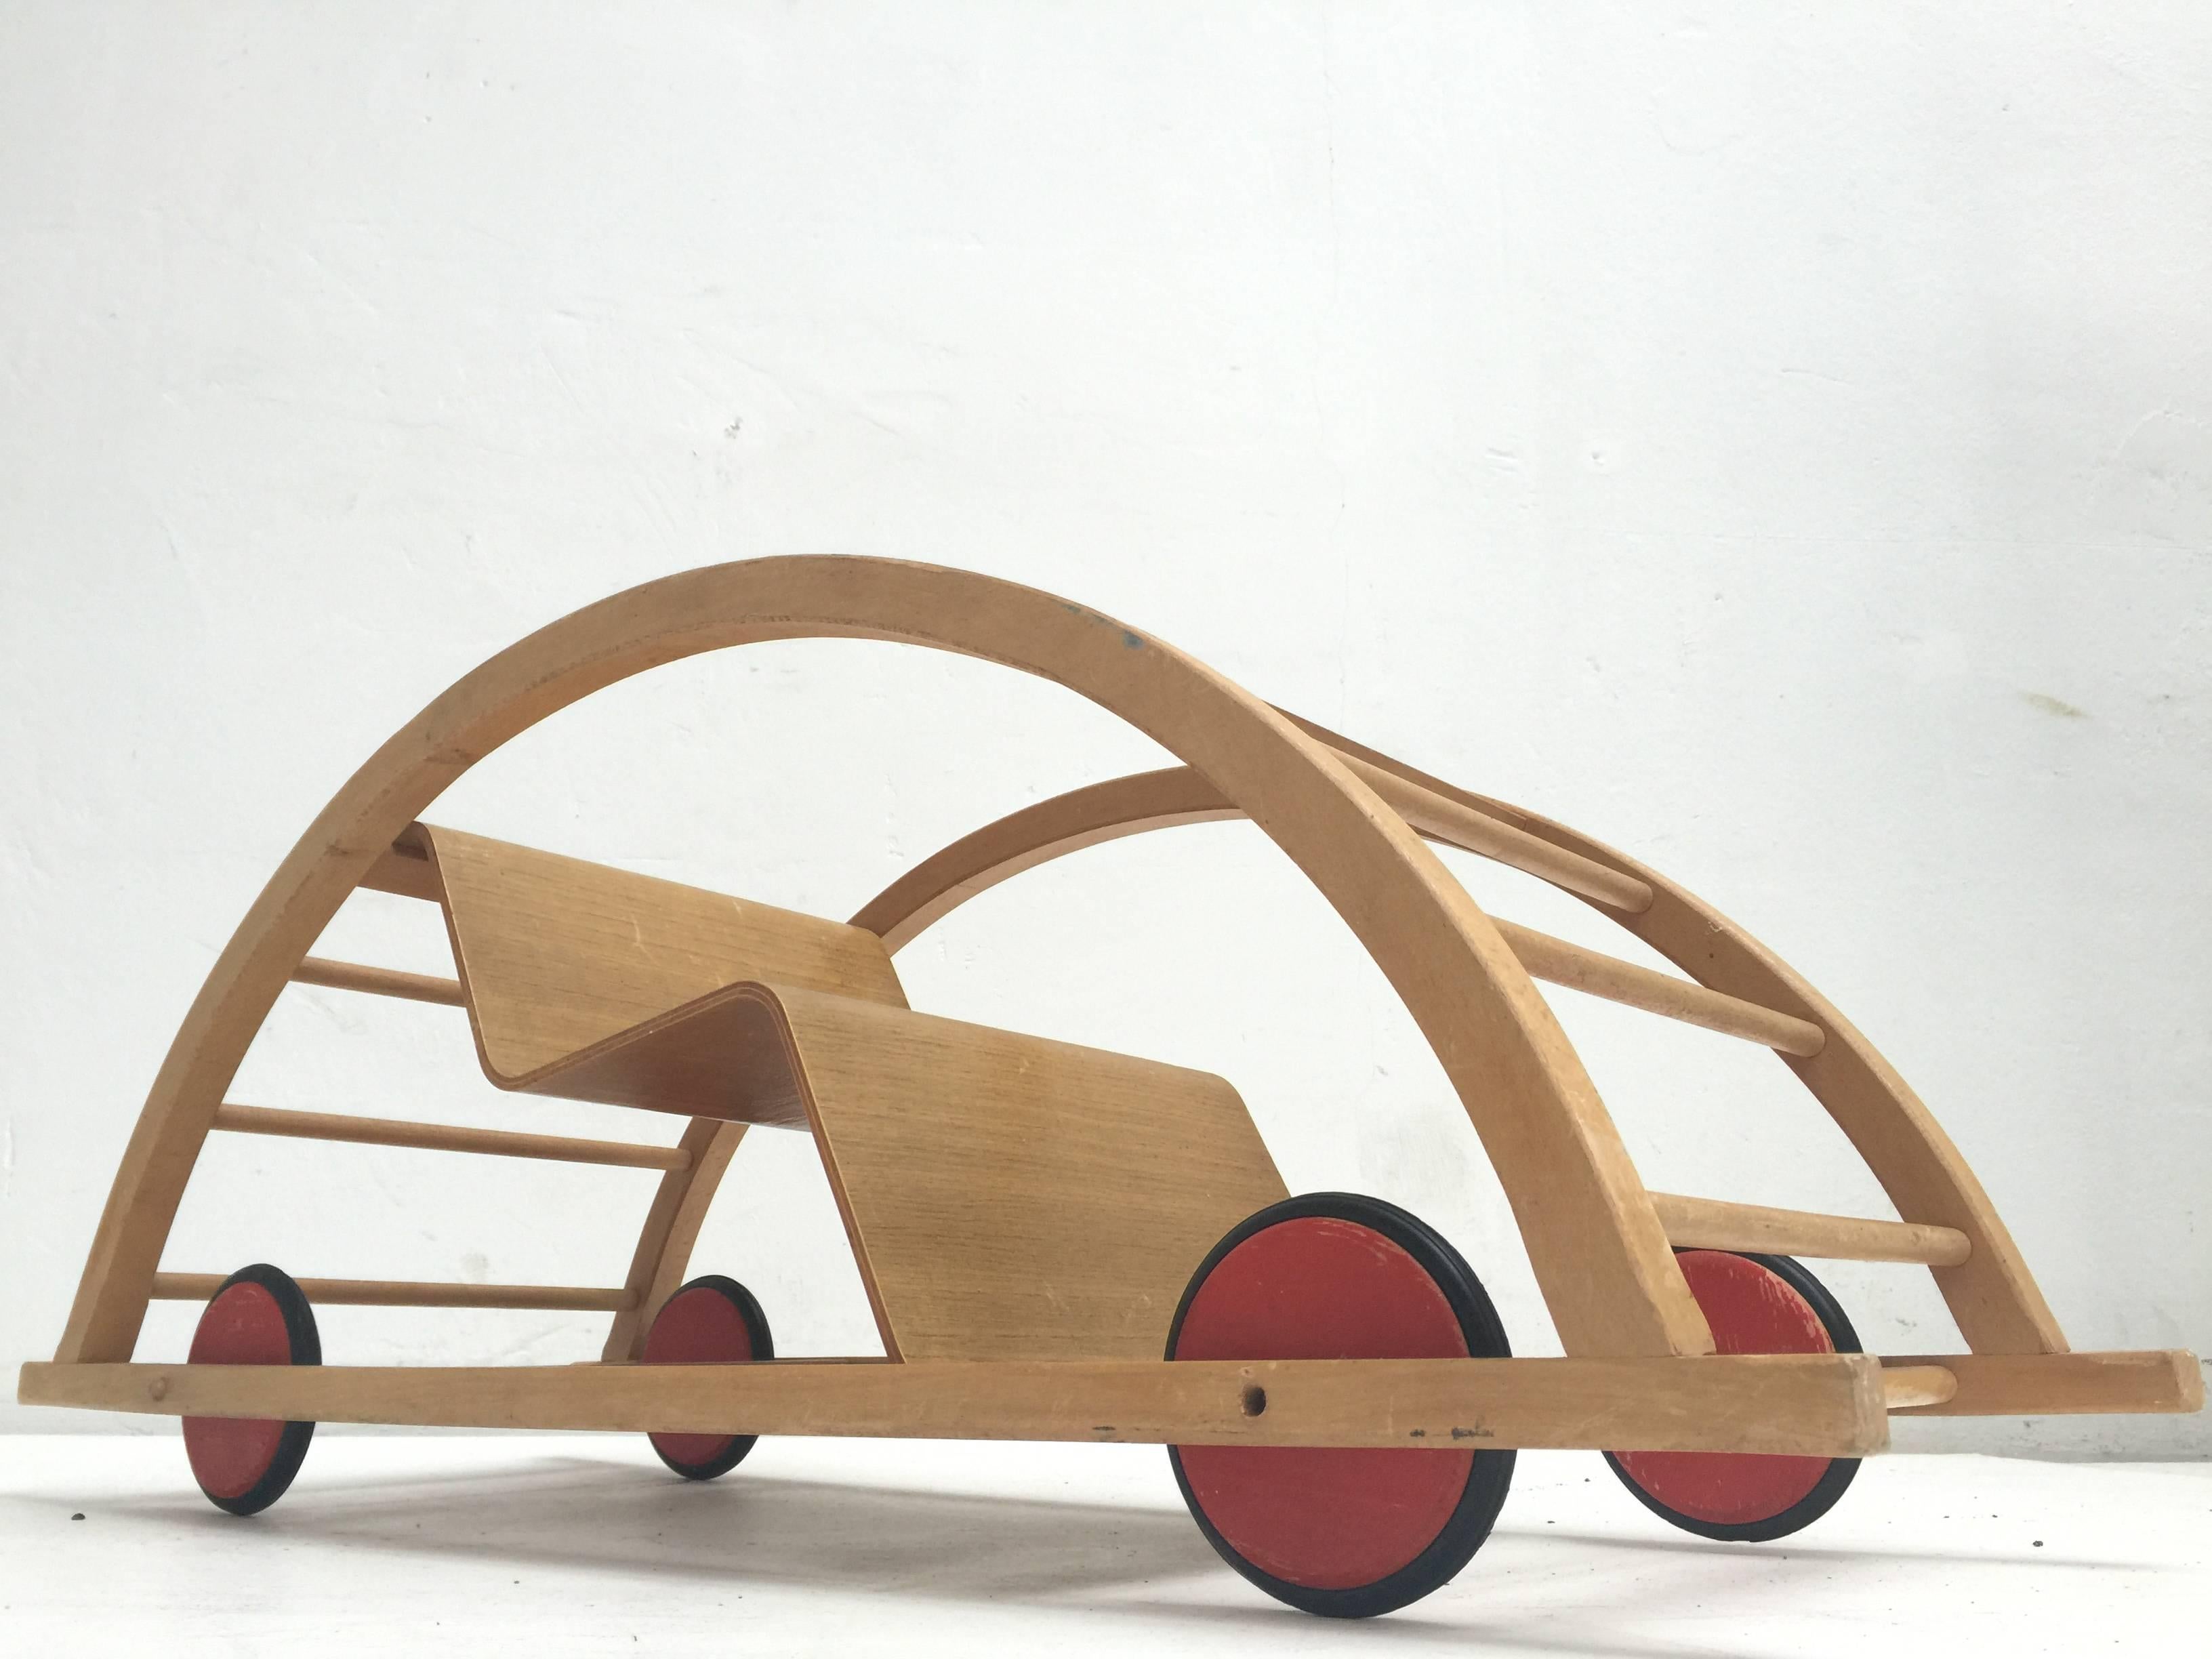 This ingenious design for children is from German (DDR) designers Hans Brockhage and Erwin Andra made in the early 1950's

Hans Brockhage (1925-2009) was wounded in WWII and started a study as sculptor in 1945 in Dresden were he got educated by